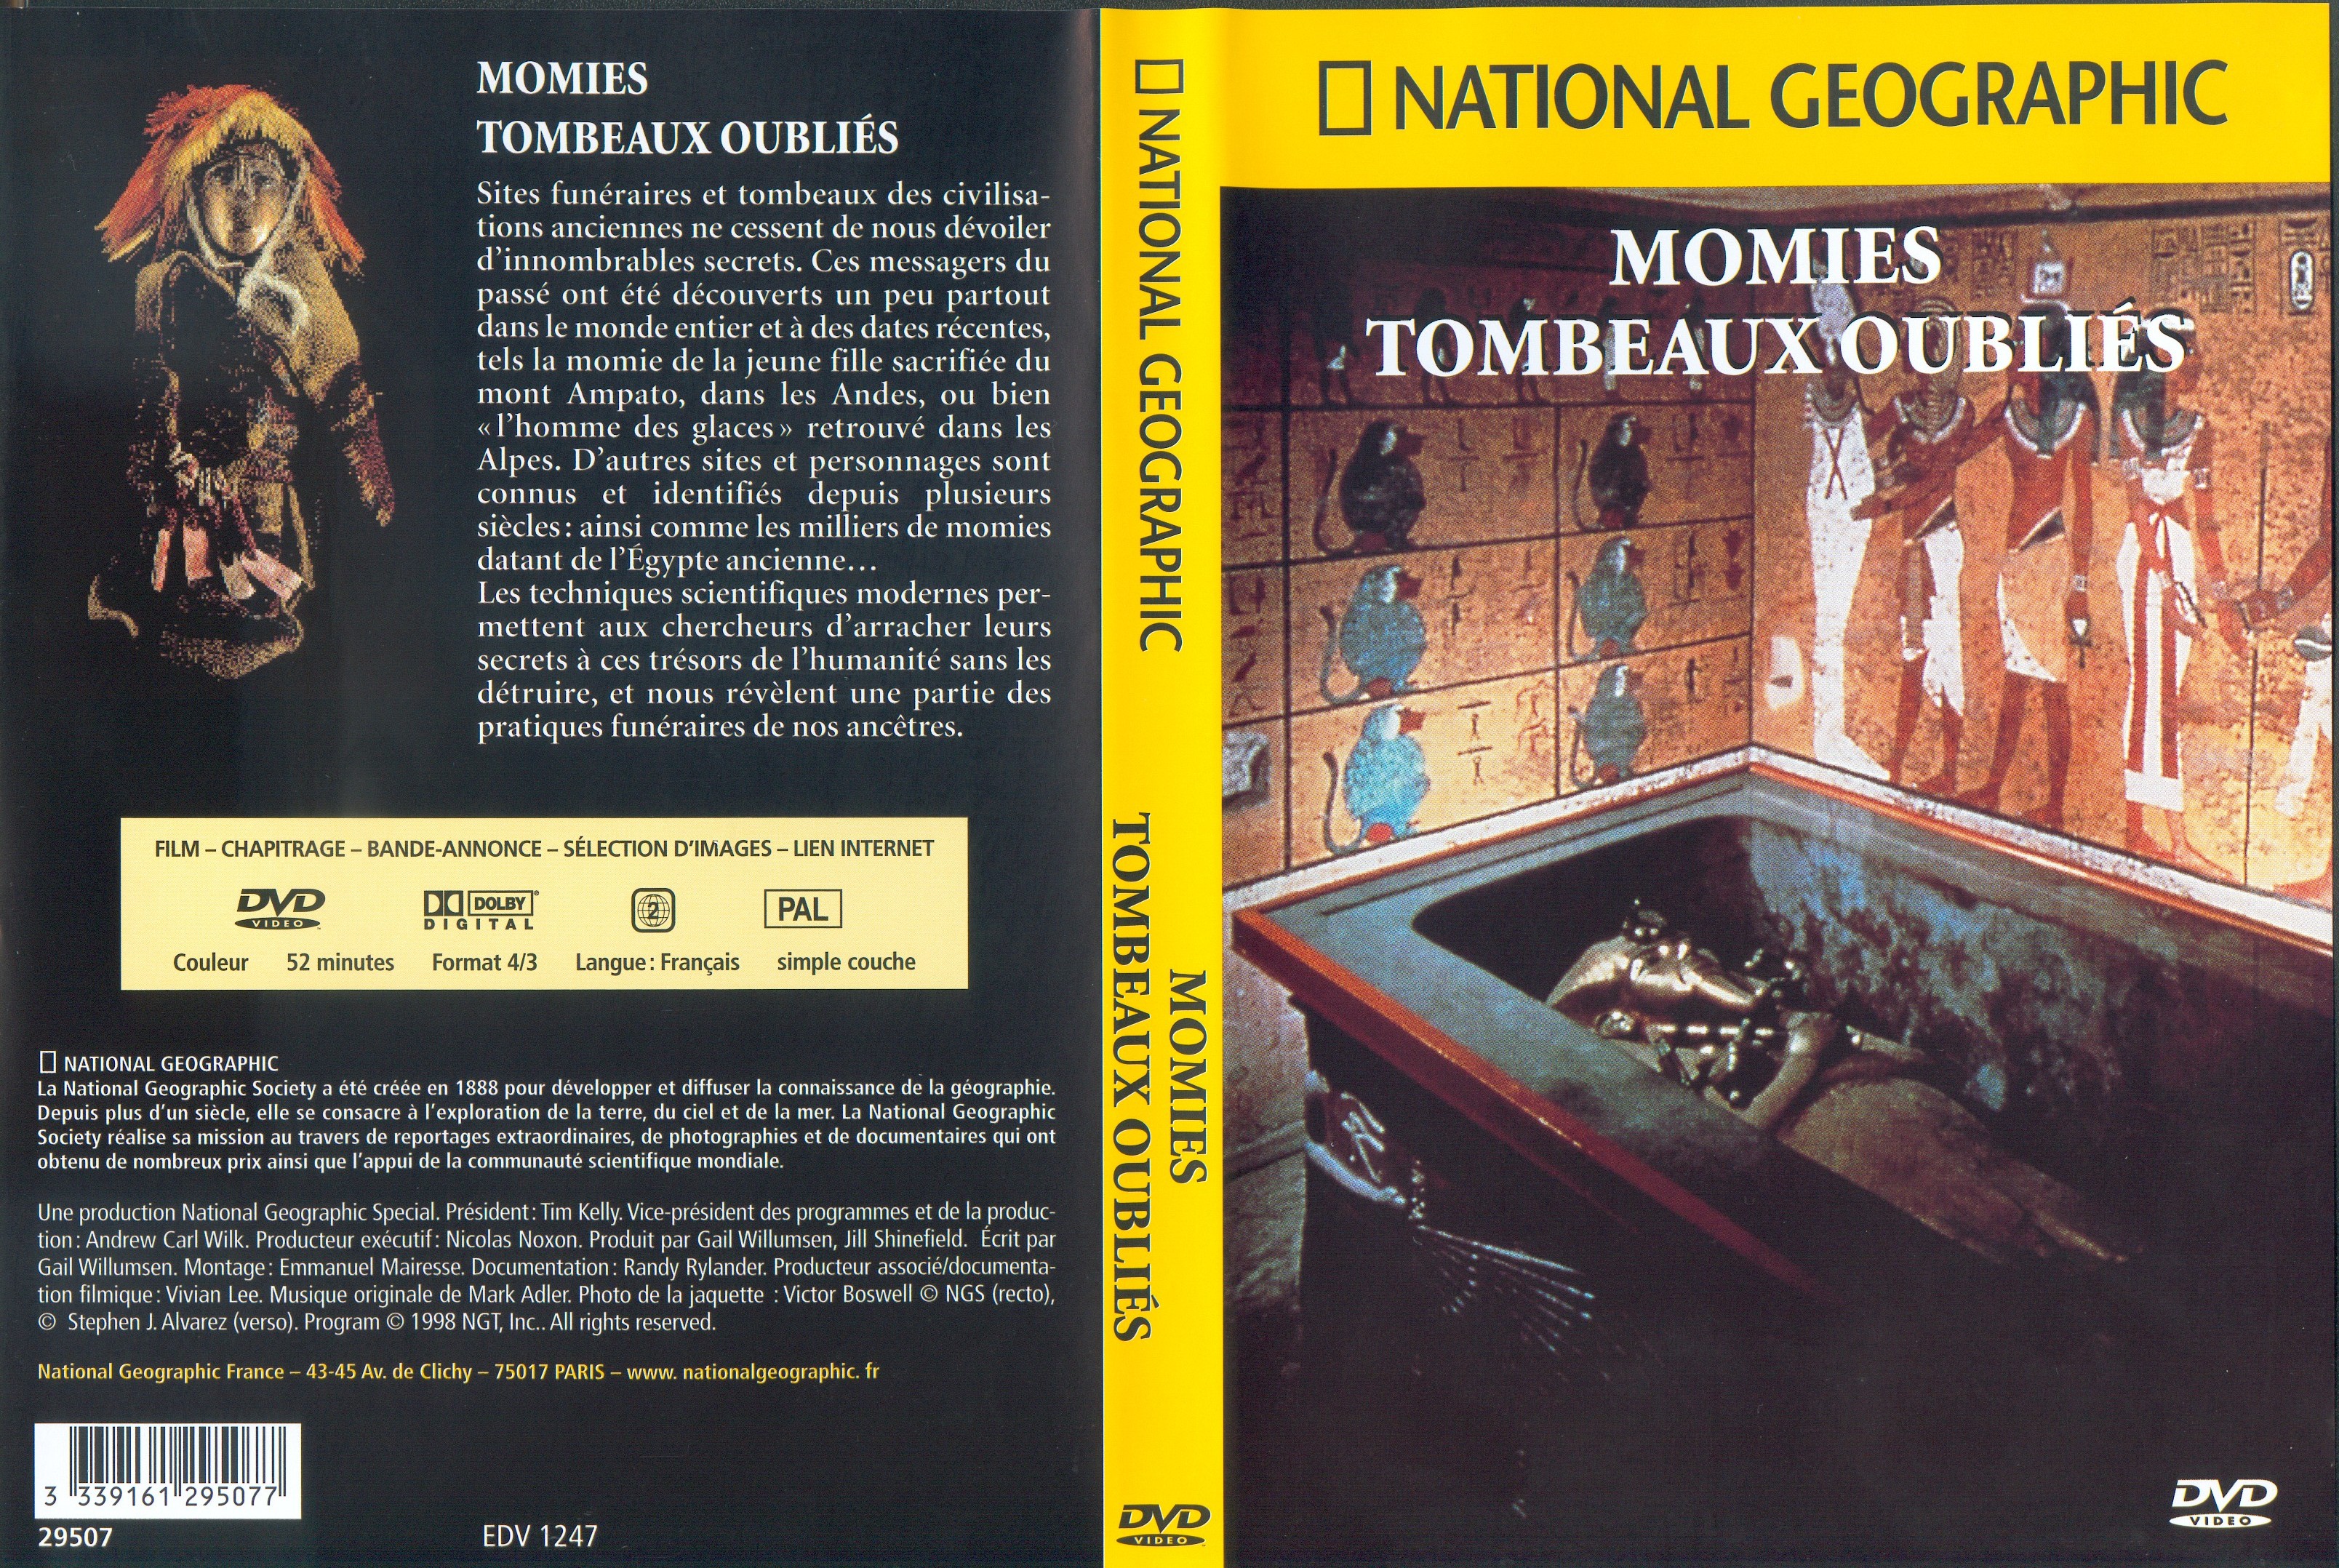 Jaquette DVD National Gographic - Momies tombeaux oublis